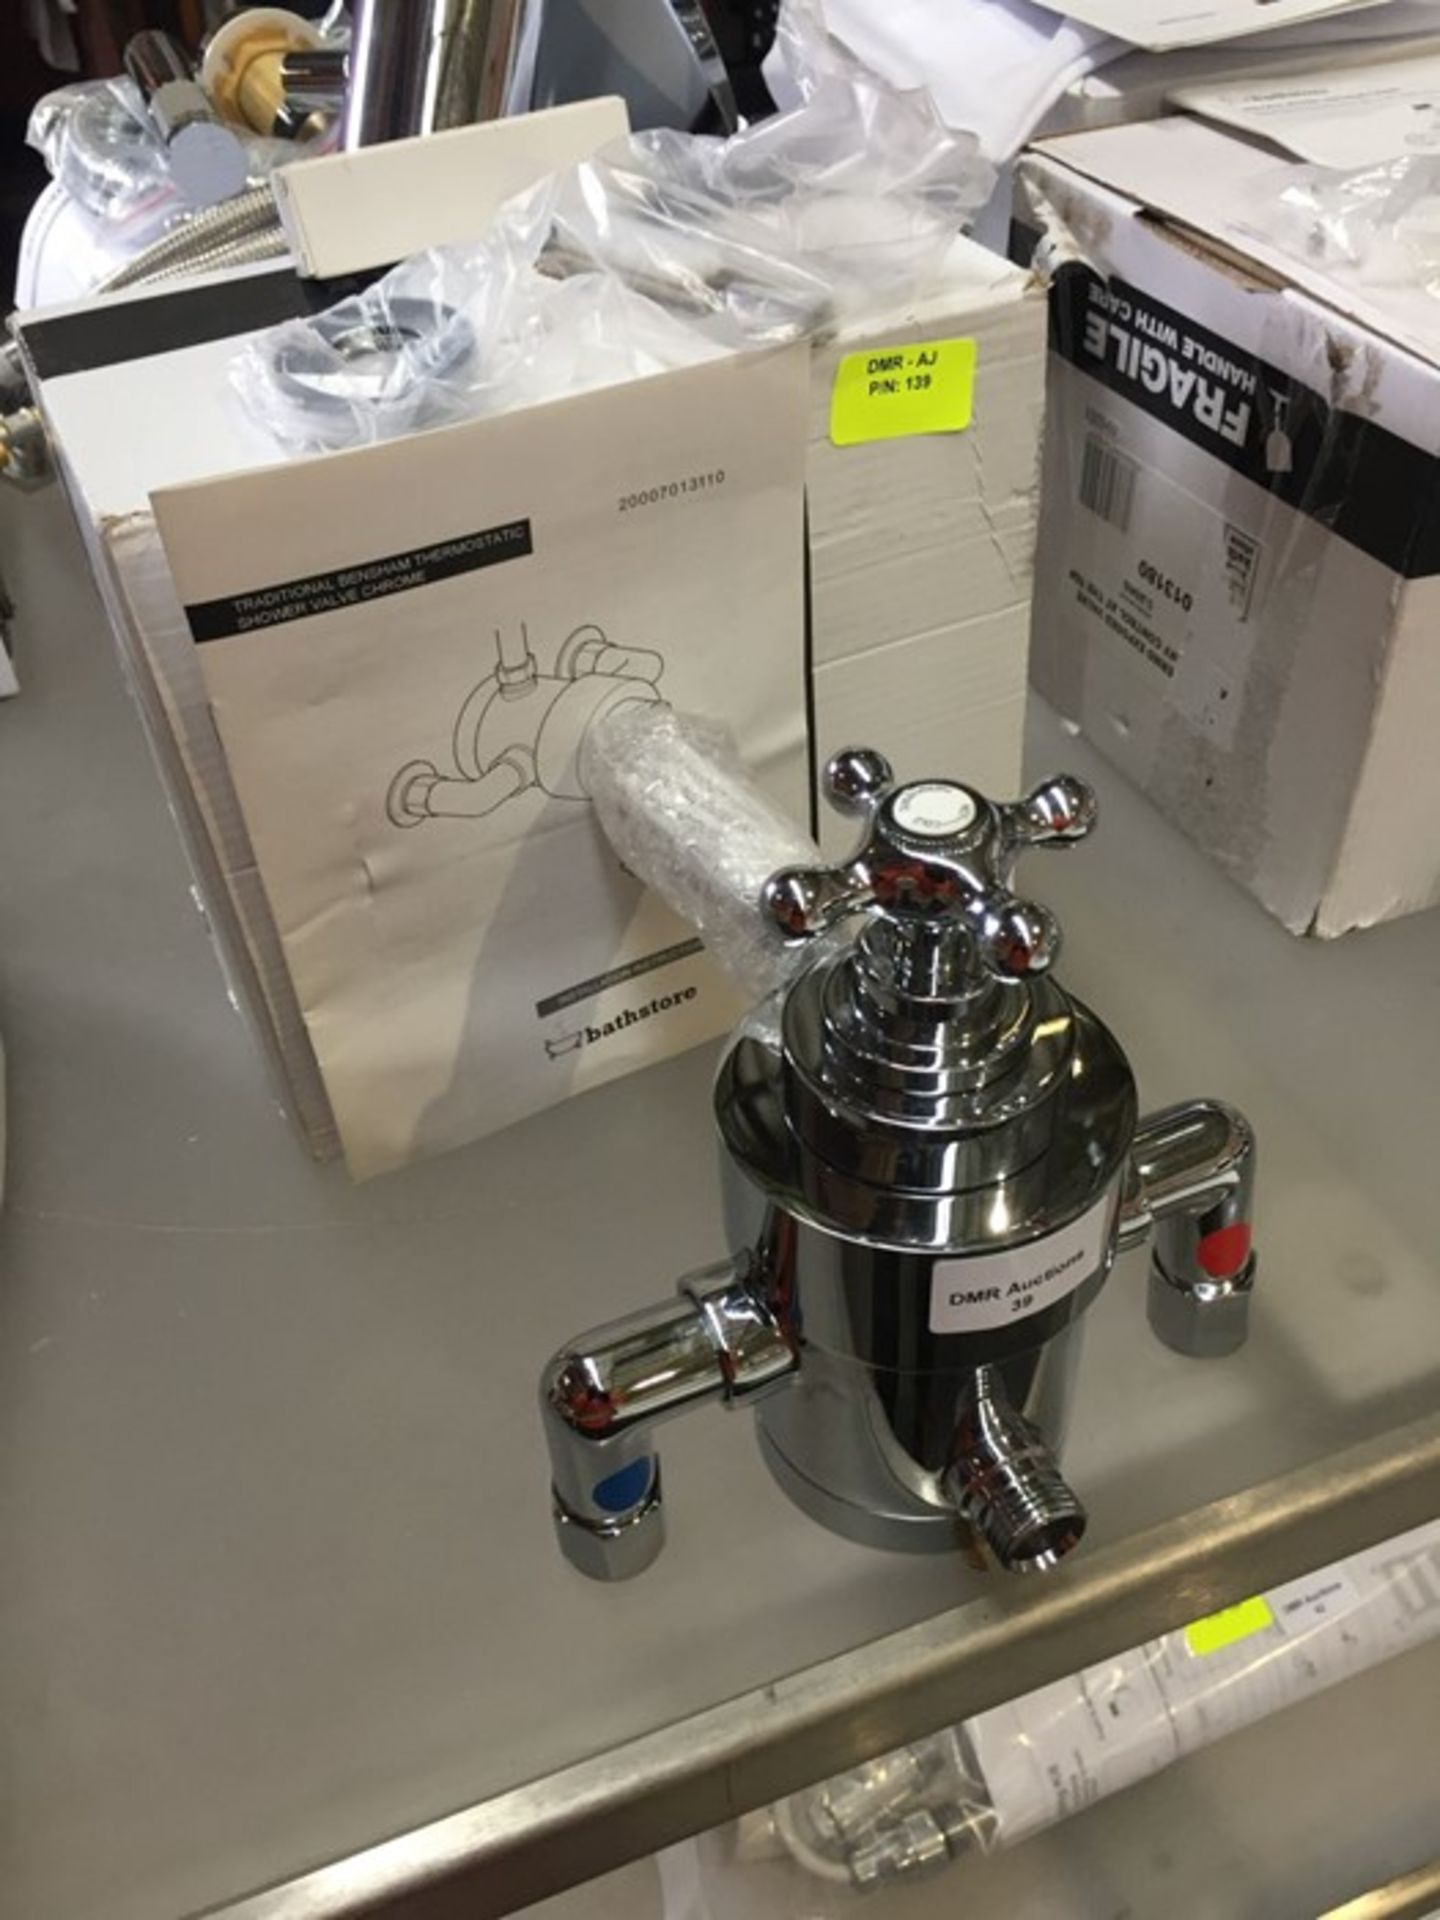 BATHSTORE TRADITIONAL BENSHAM THEROSTAIC EXPOSED SHOWER VALVE. RRP £495 (PUBLIC VIEWING AVAILABLE